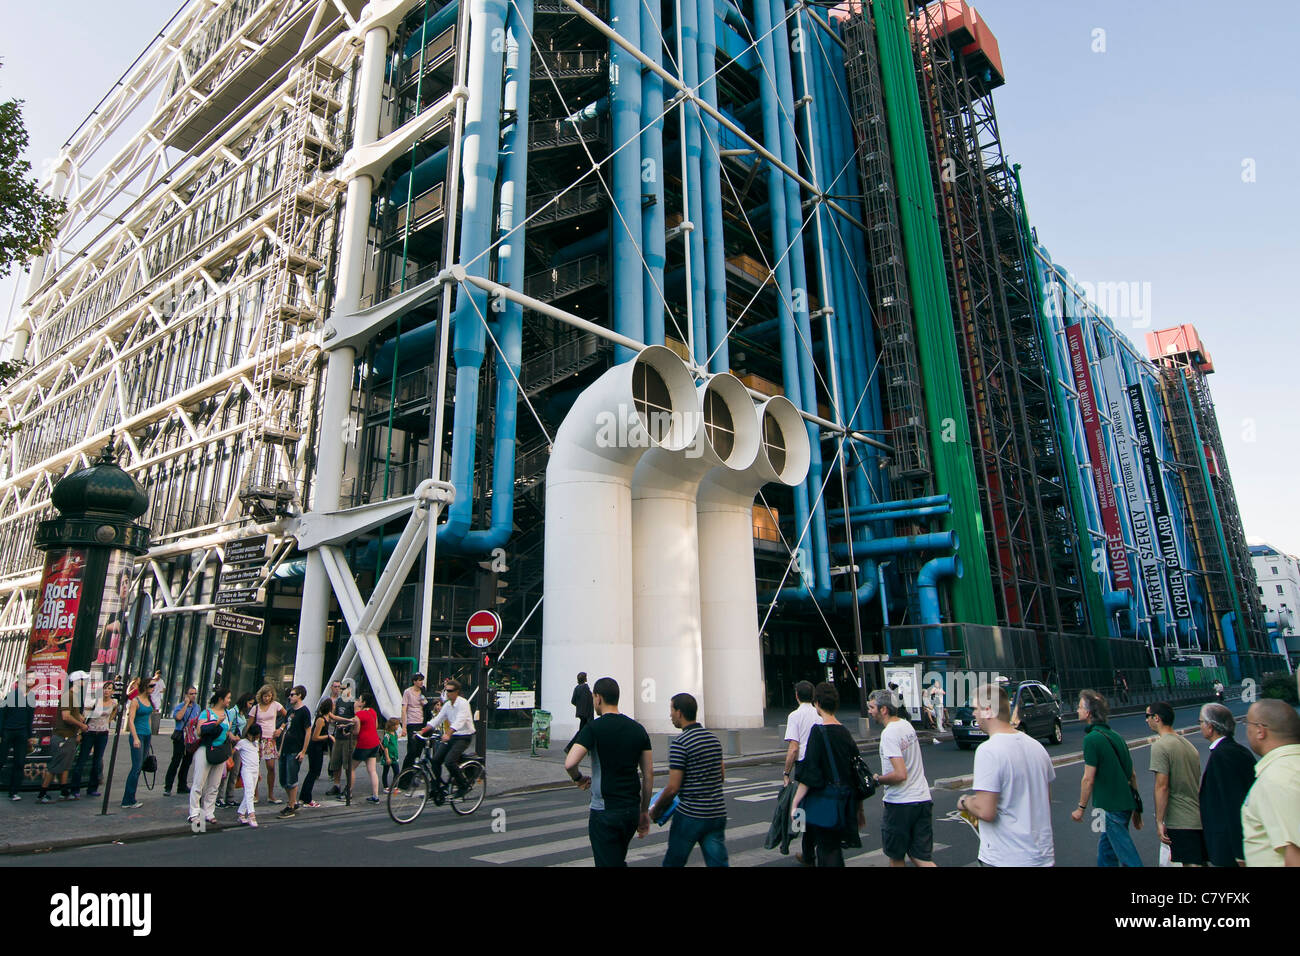 HVAC pipes in front of Georges Pompidou center - Paris, France Stock Photo